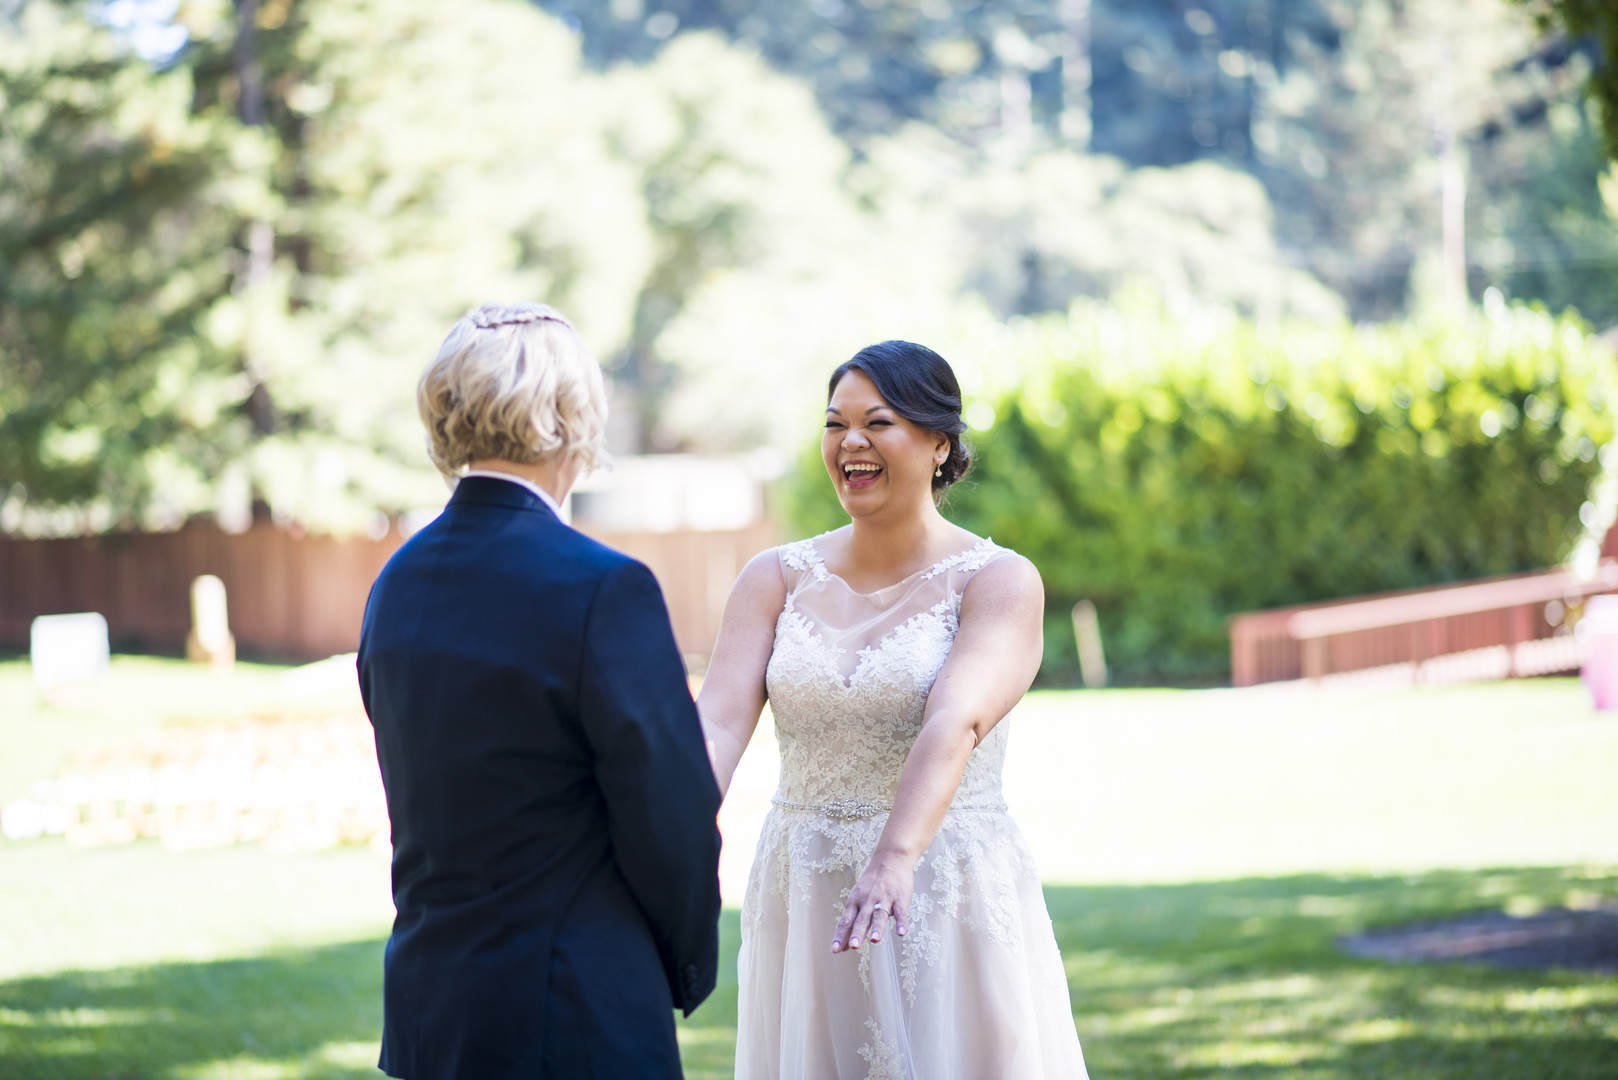 Garden wedding at the Mountain Terrace in Woodside, California two brides white dress tuxedo first look